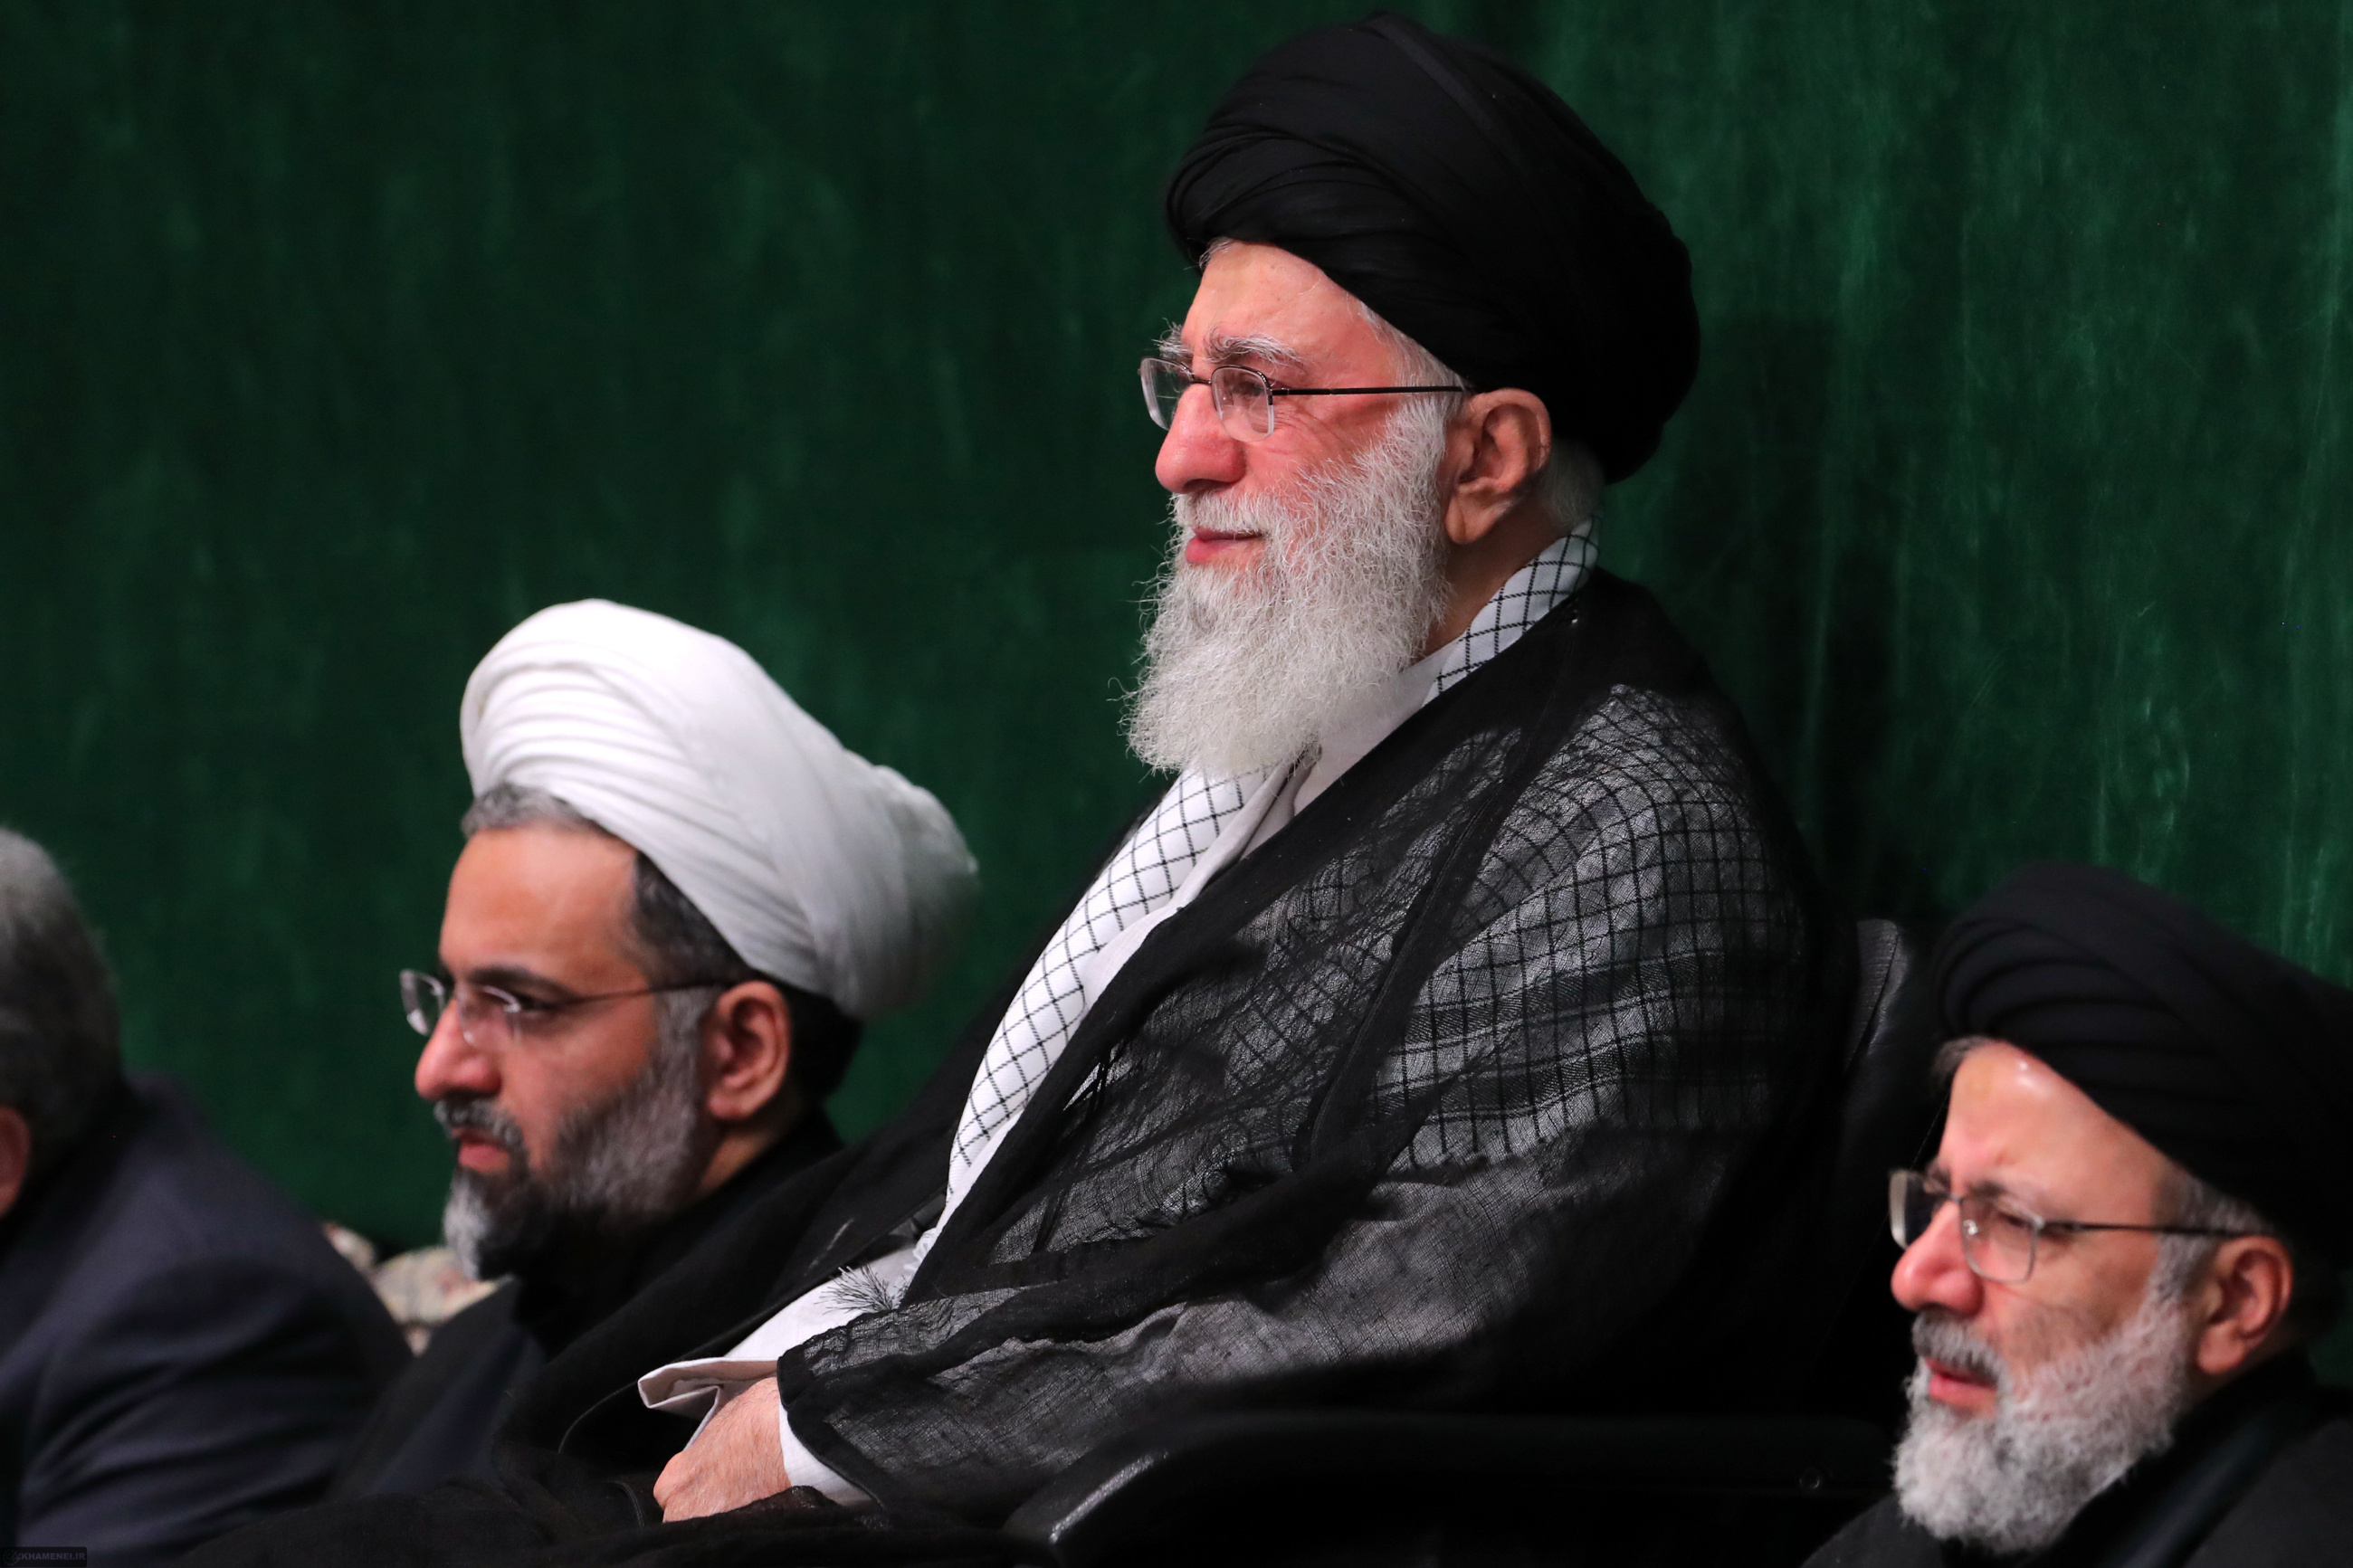 Being steadfast on the right path improves the country, benefits the world: Imam Khamenei